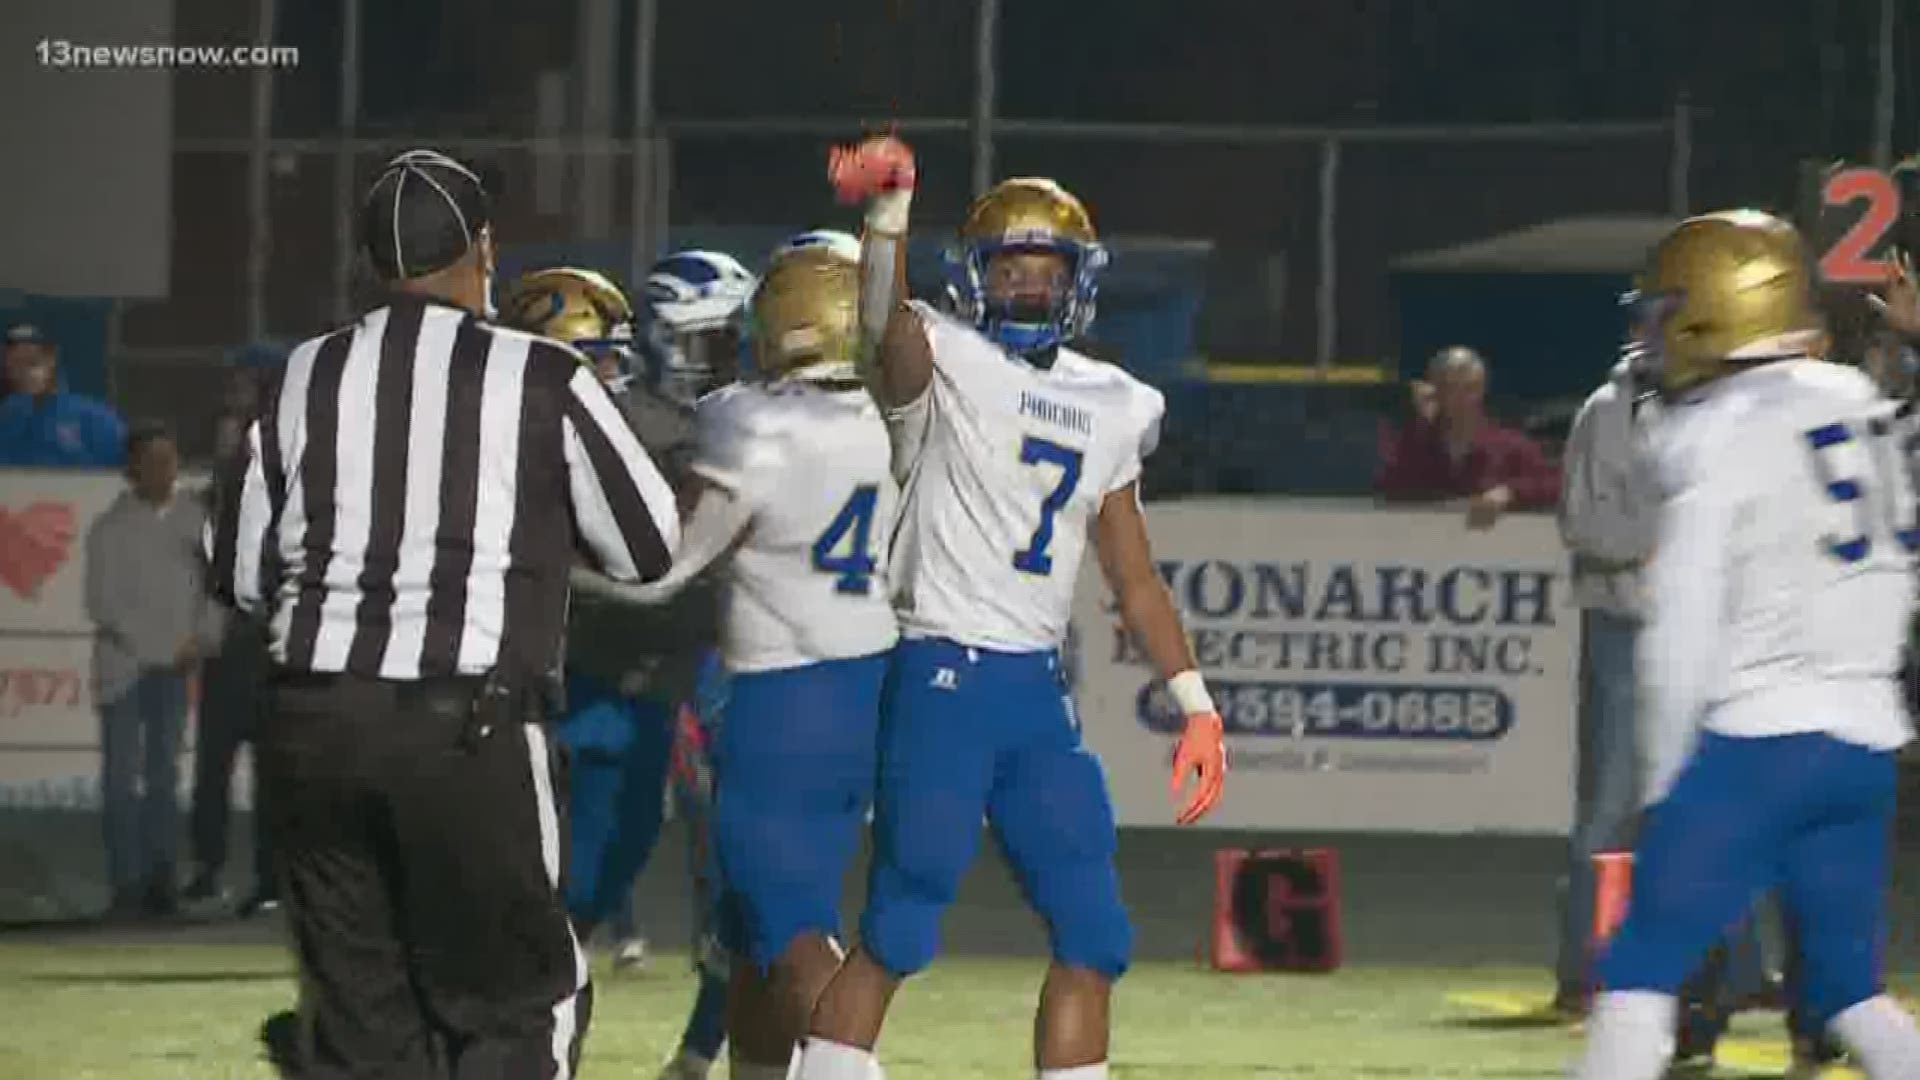 The Phoebus running back scored 4 TDs and rushed for over 200 yards in win over York.